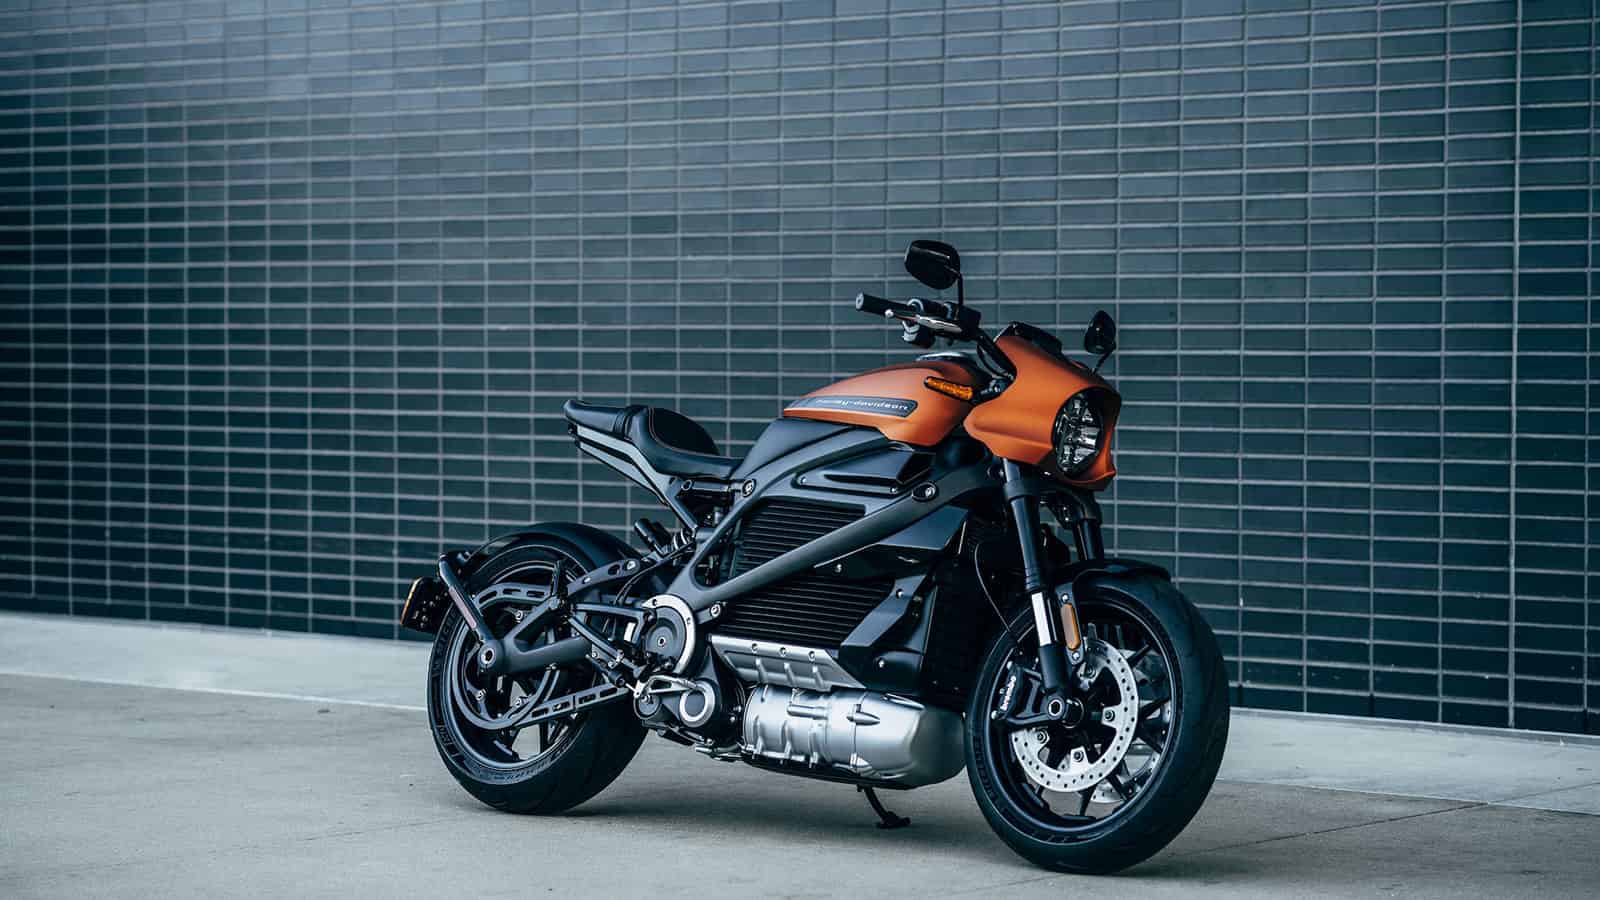 Electric Motorcycle market growing, harley davidson livewire